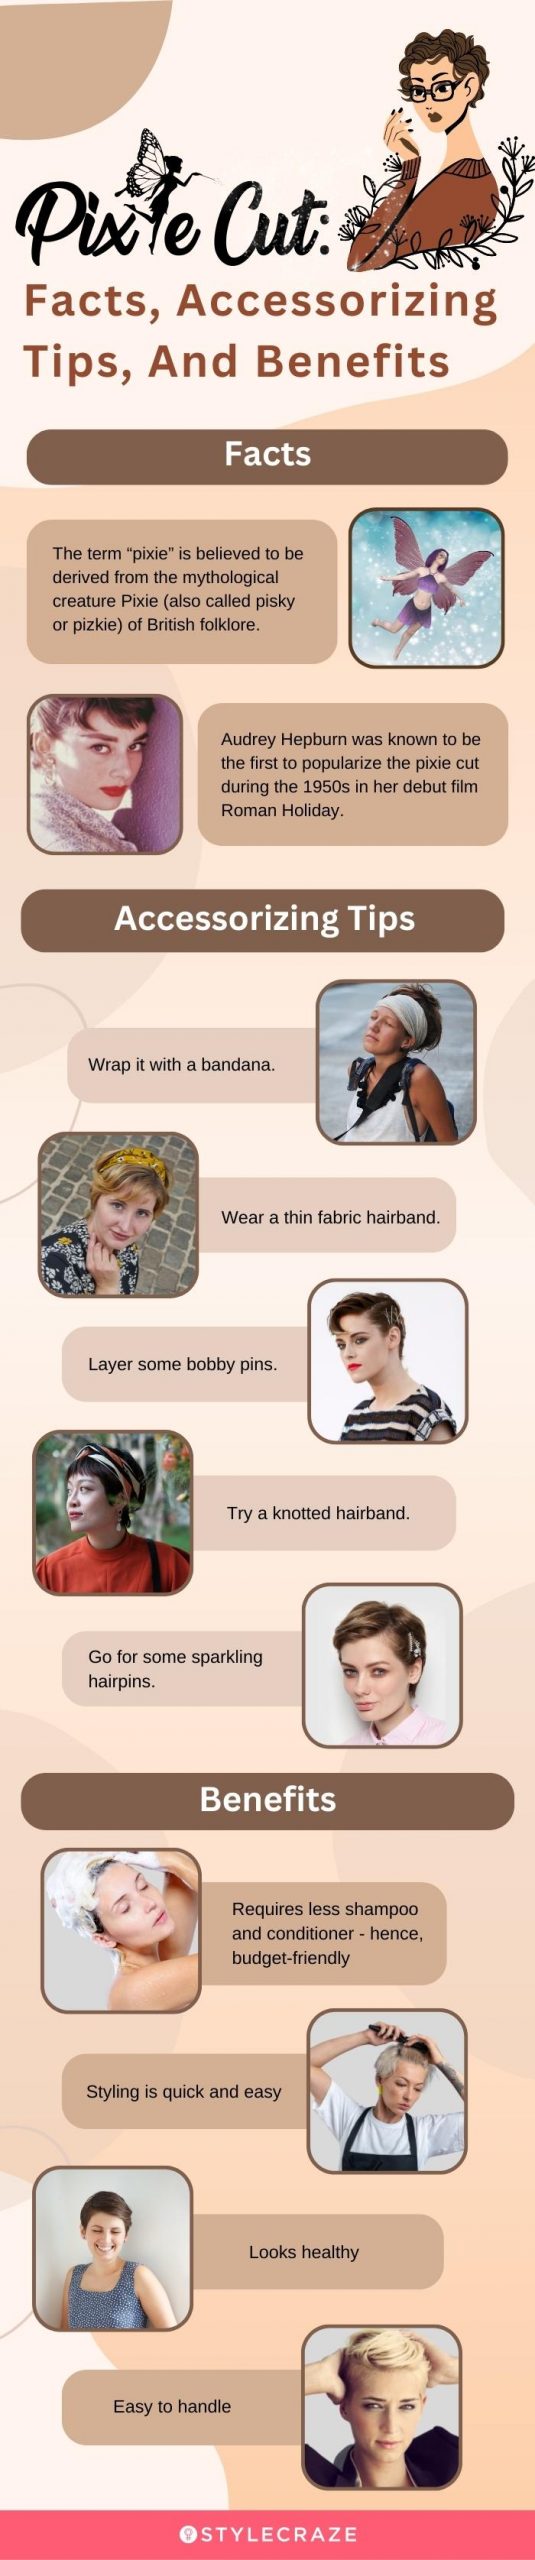 pixie cut facts, accessorizing tips and benefits (infographic)